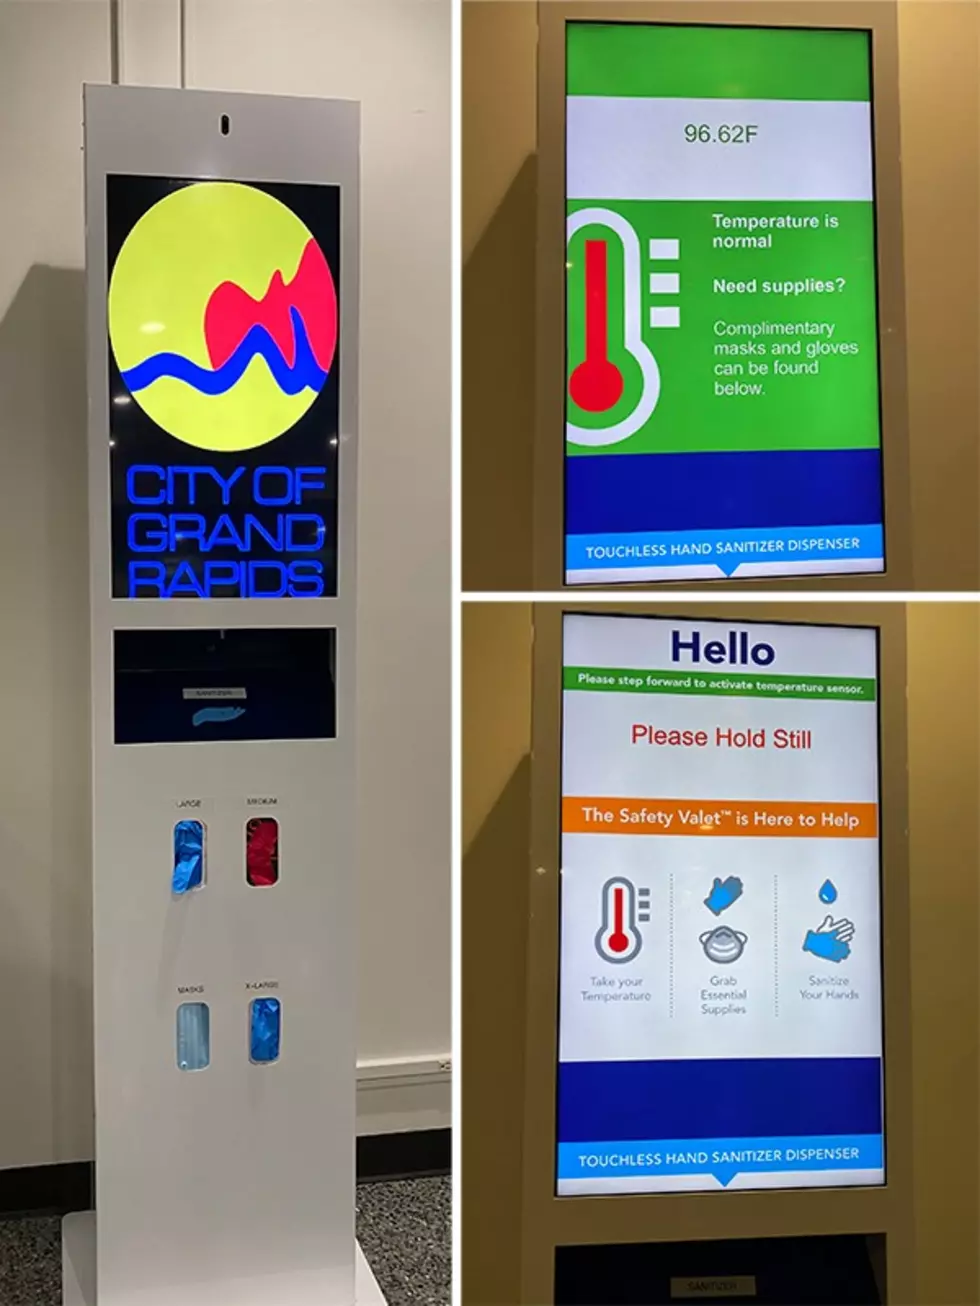 There’s Now A ‘Safety’ Kiosk For Residents in GR City Hall Lobby